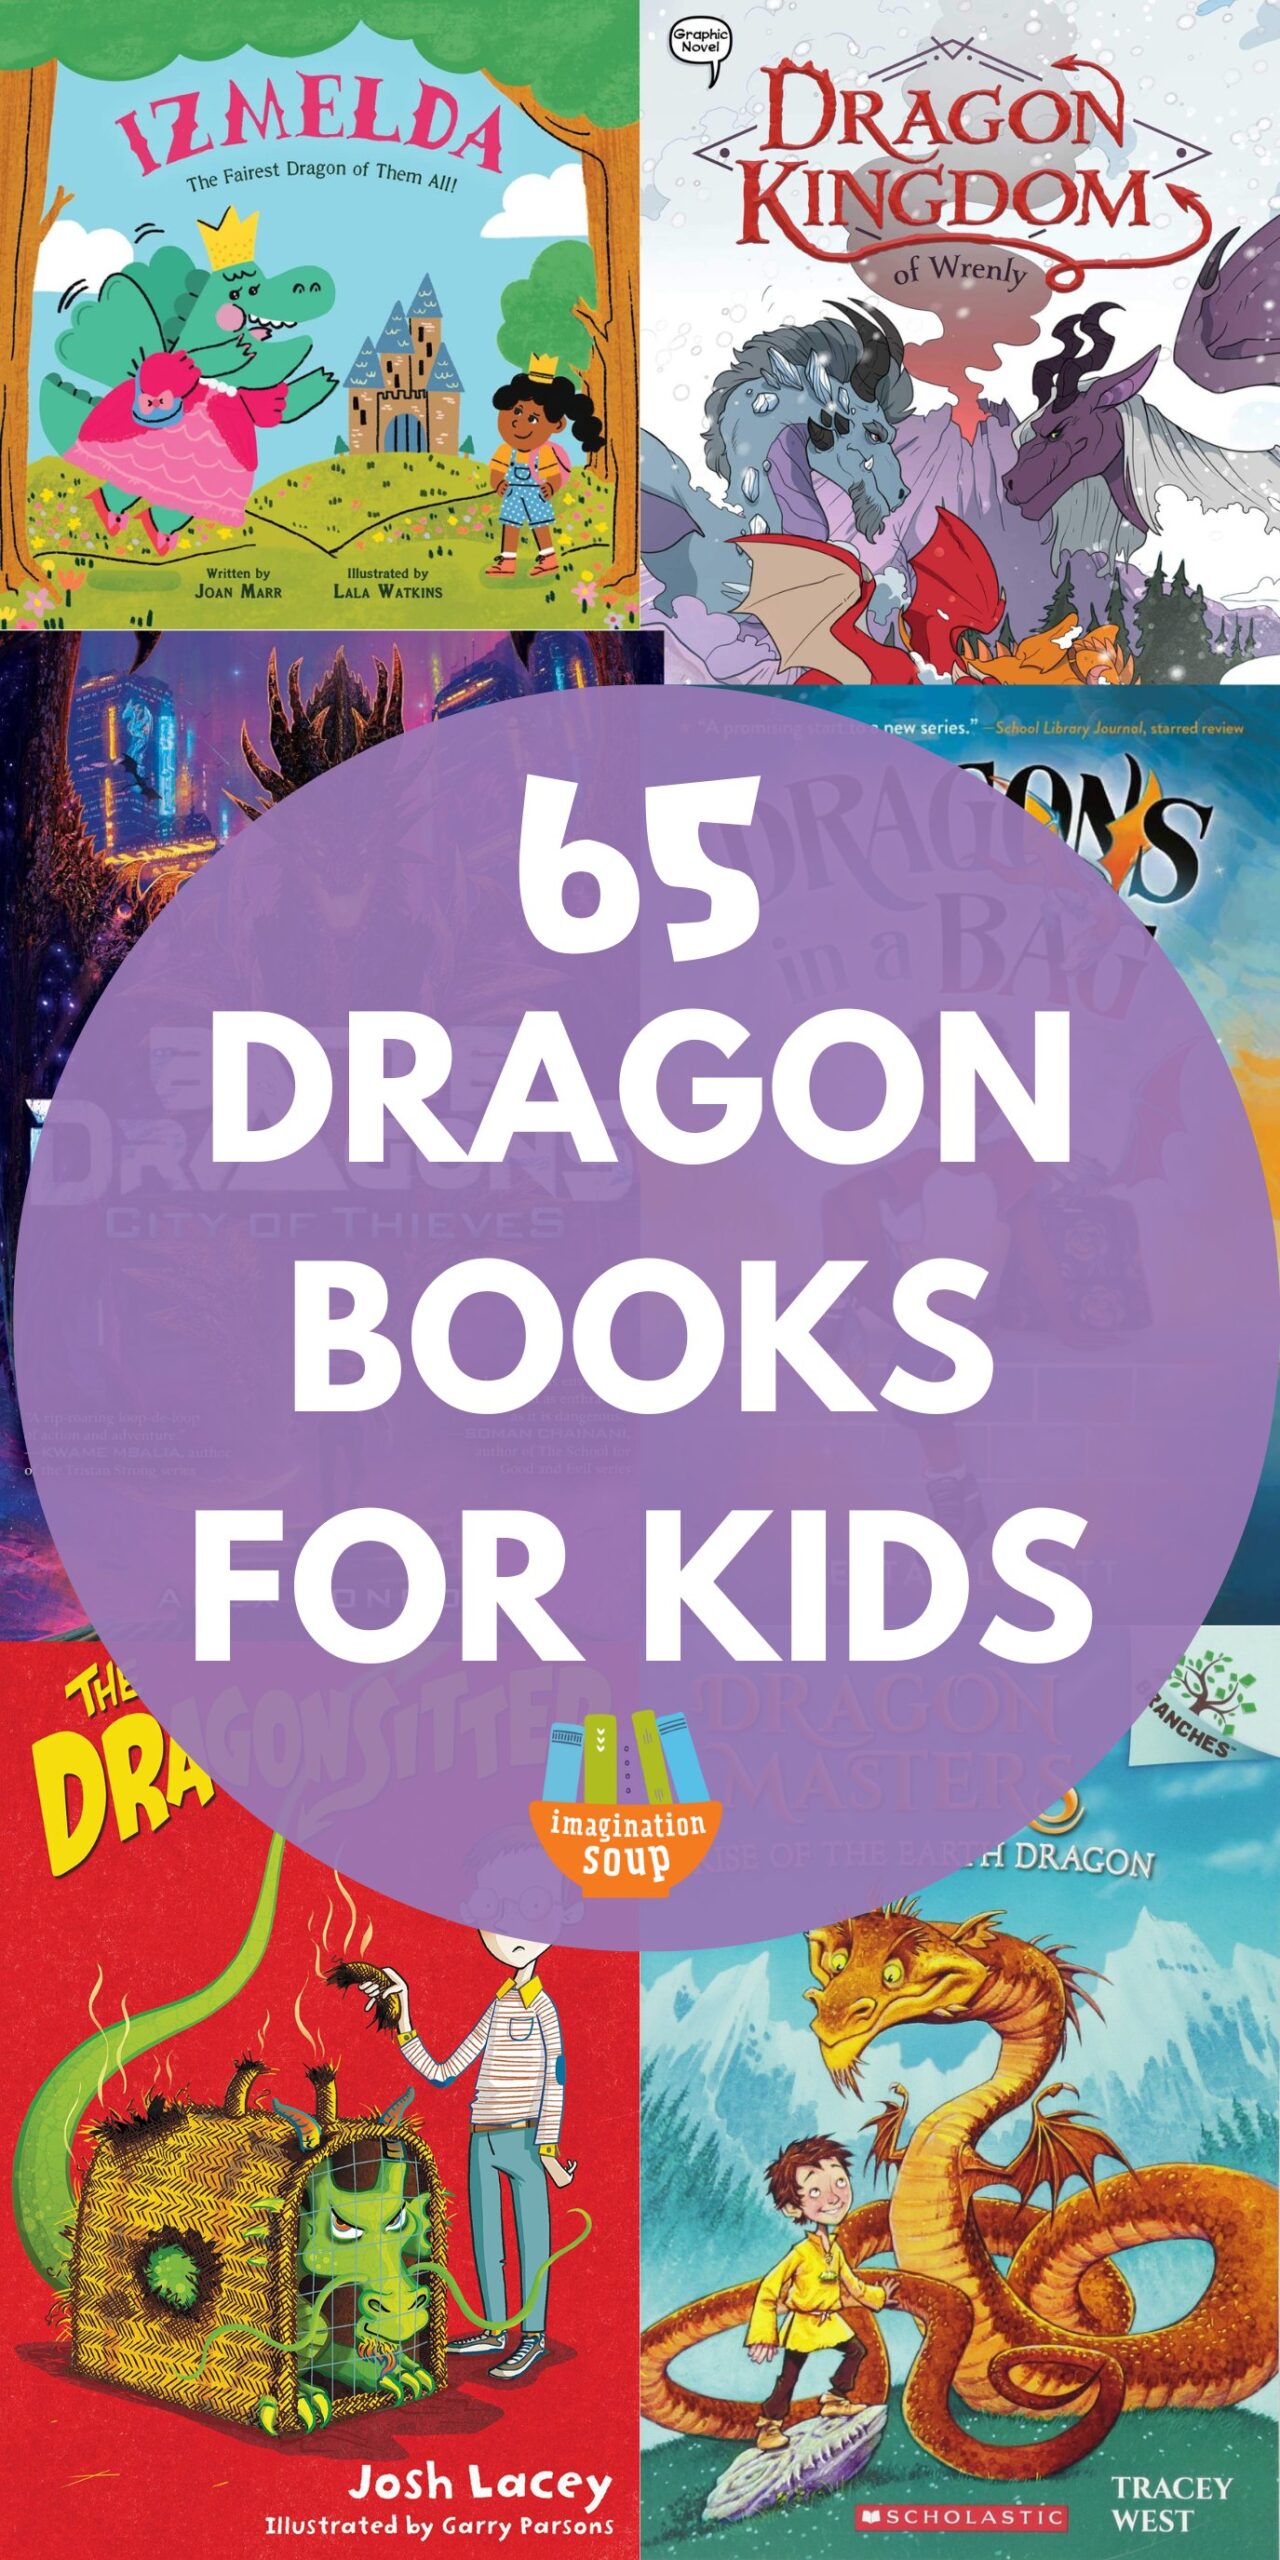 Ready for a big list of fantastical, magical dragon books for kids who love dragons?